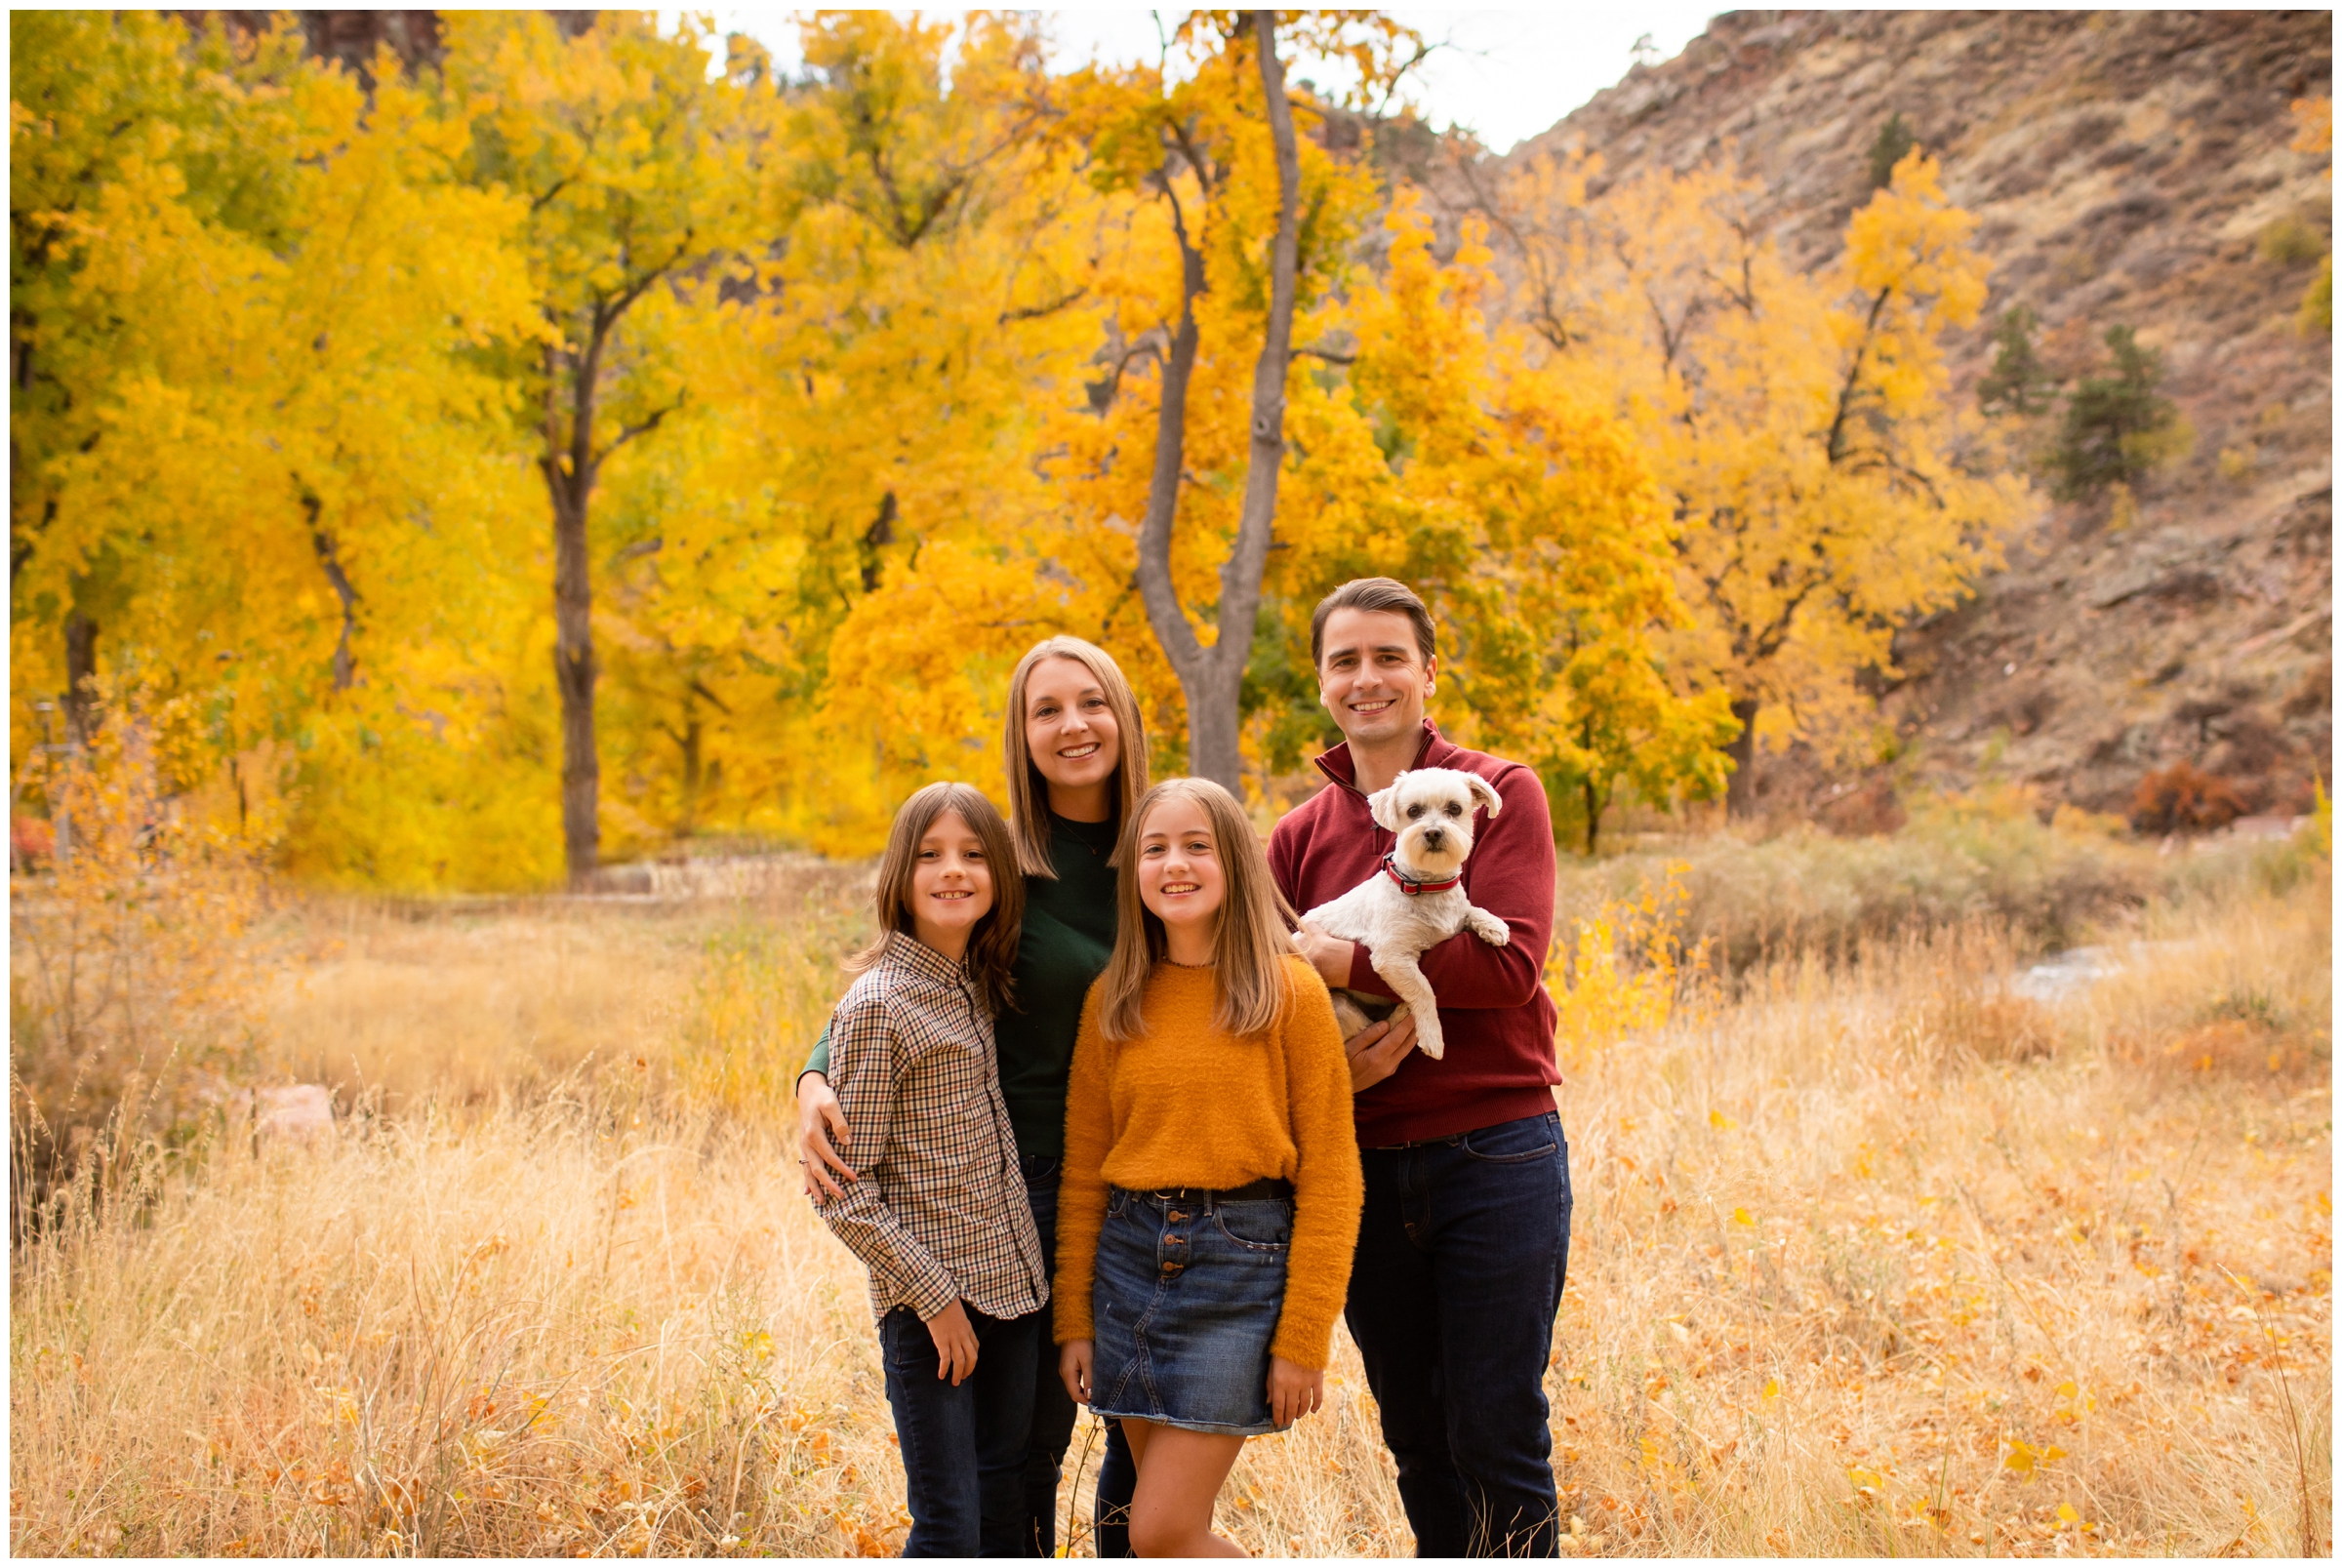 Colorado portrait session in the mountains with fall foliage in background 